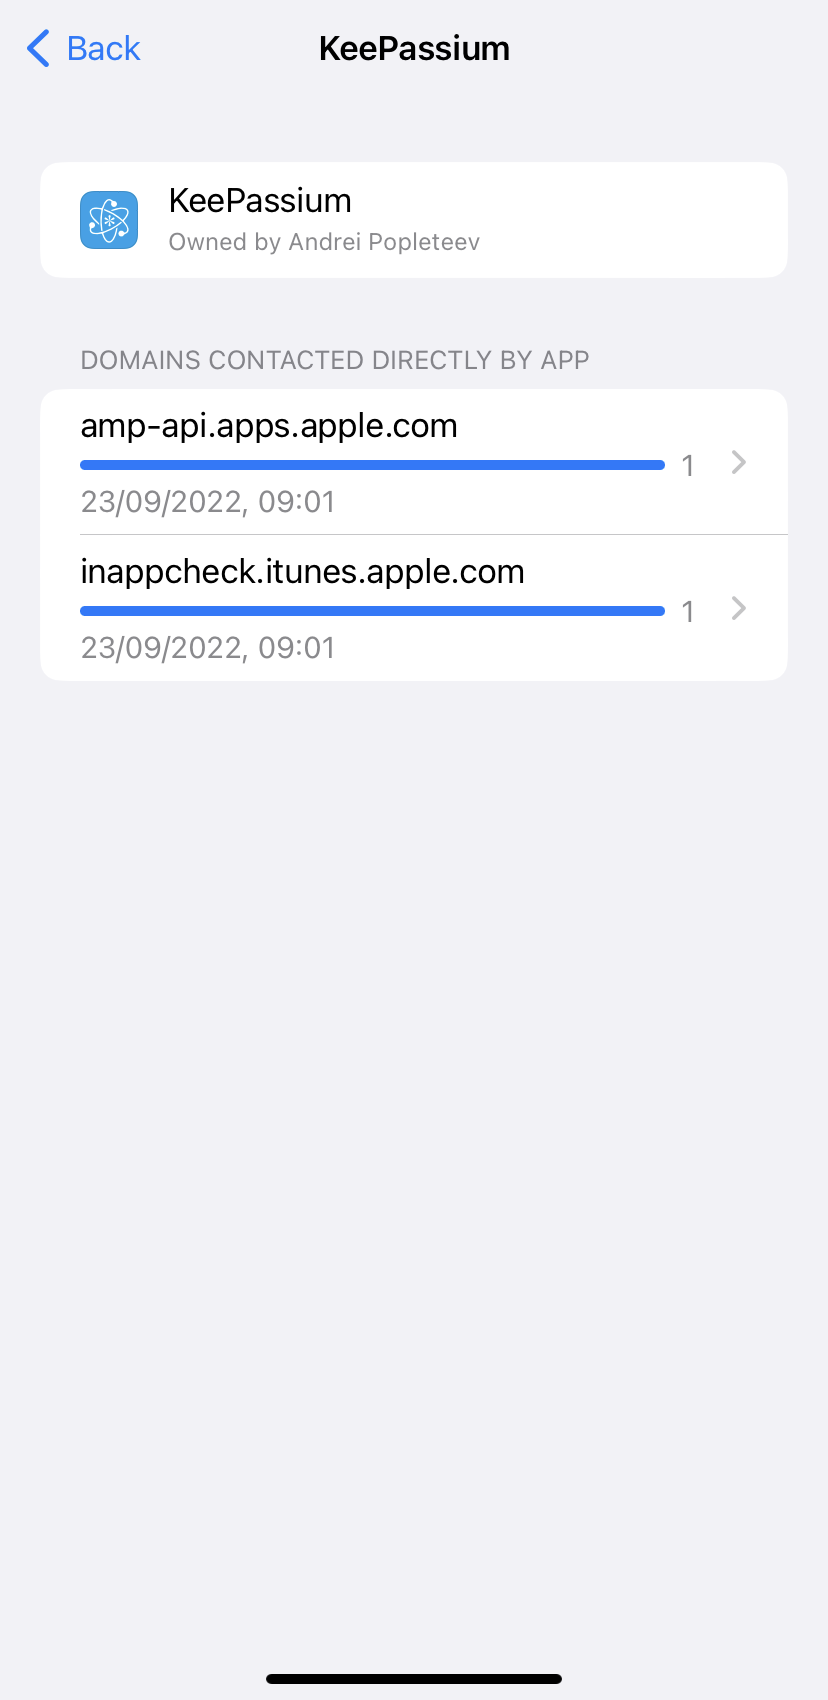 iOS App Privacy Report for KeePassium